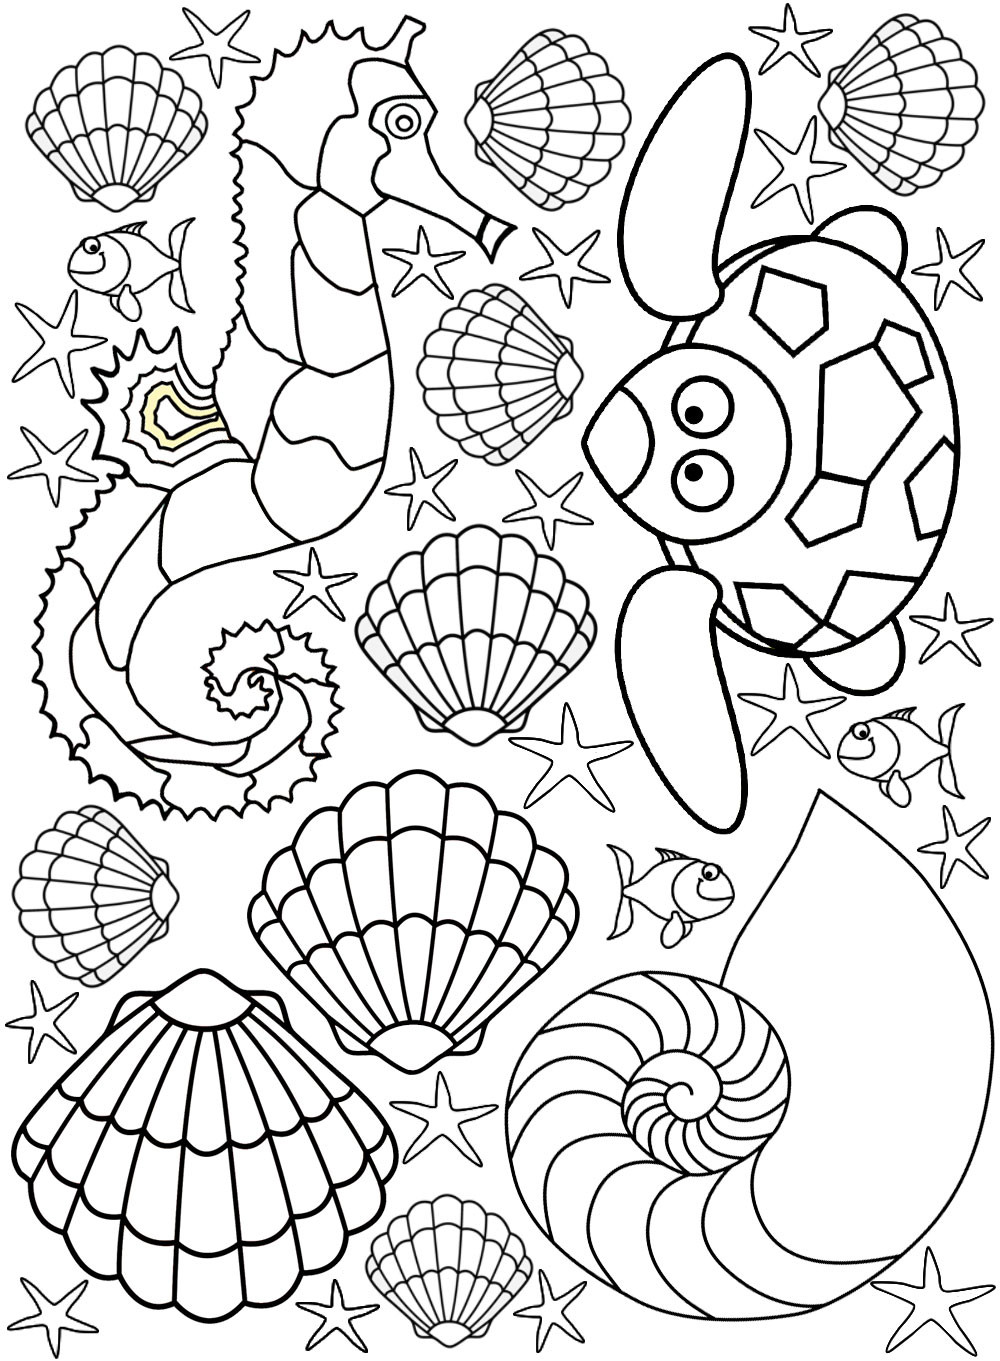 Coloring Sheets Free Printable
 Seaside Creatures Colouring Page